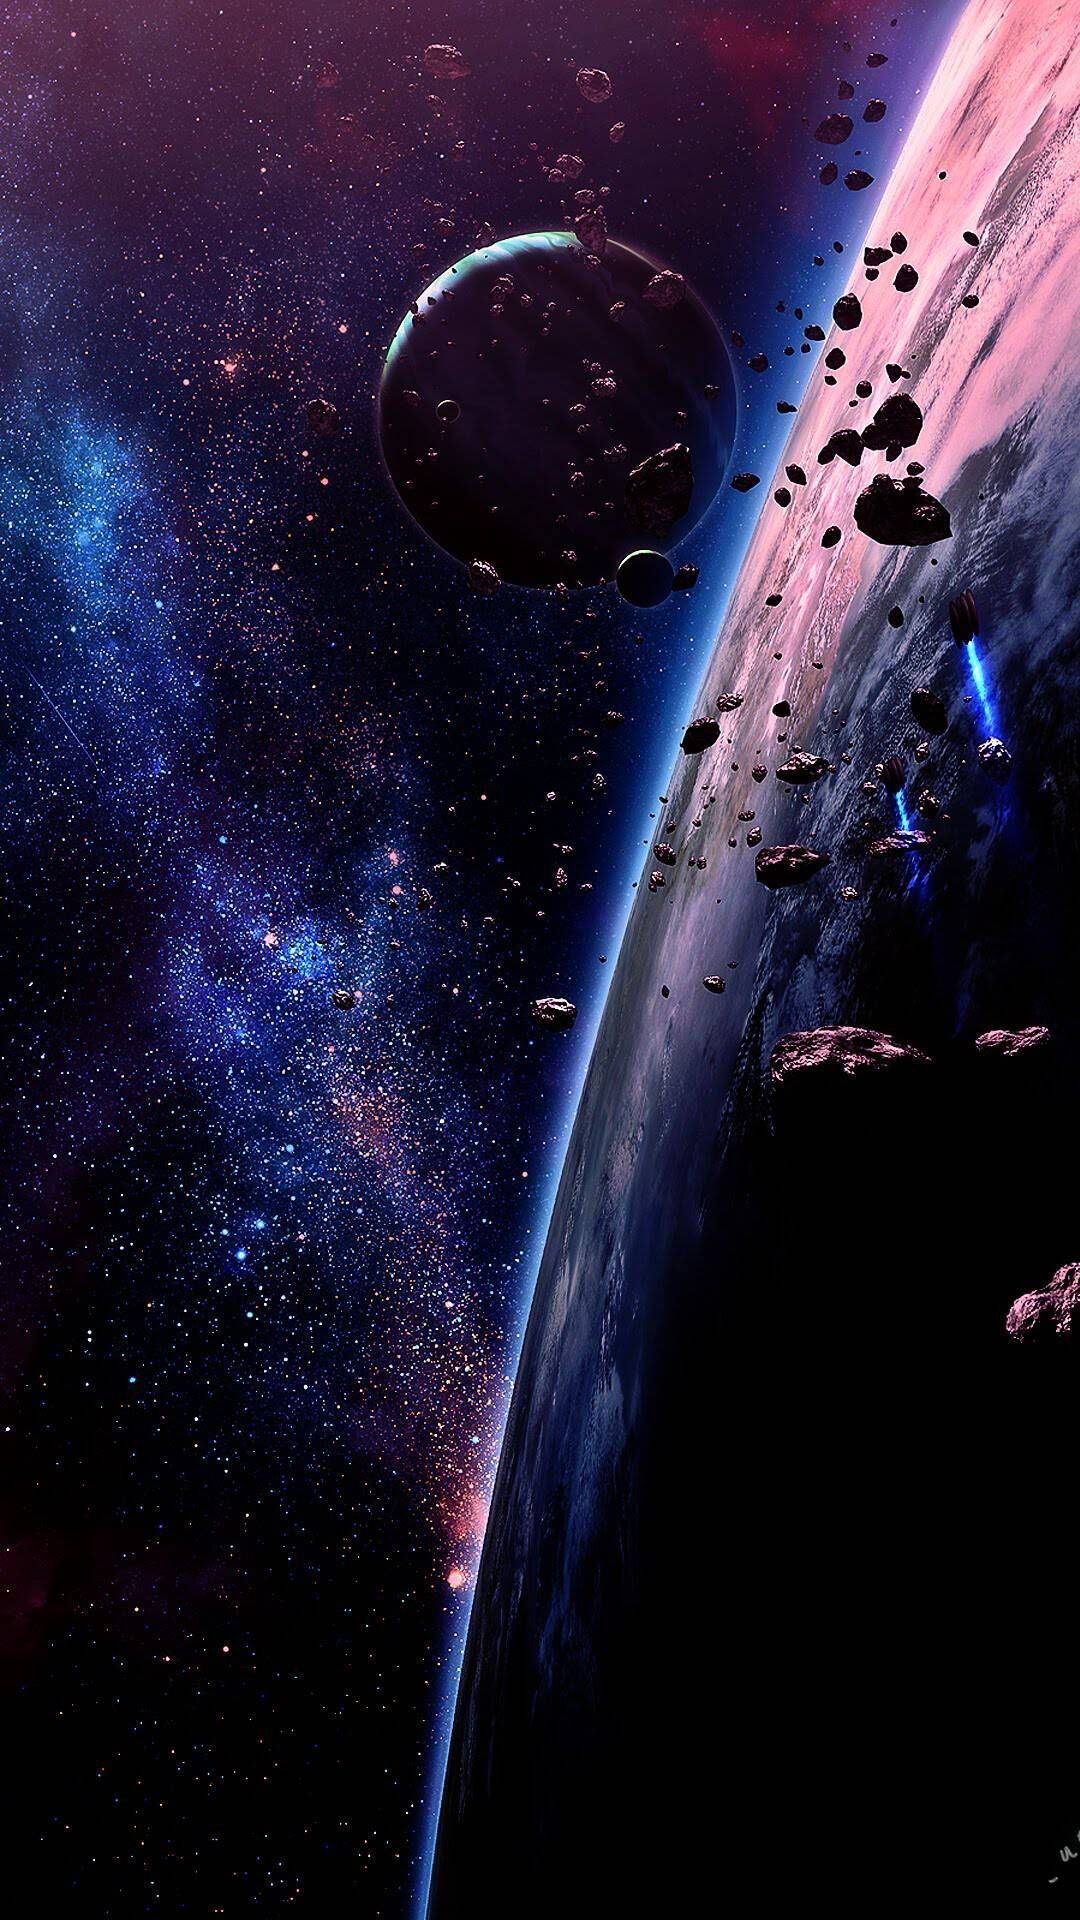 AMOLED Space Wallpaper. AMOLED Wallpaper. Black Background. Dark Wallpaper for Android. Space iphone wallpaper, Space art, Wallpaper earth